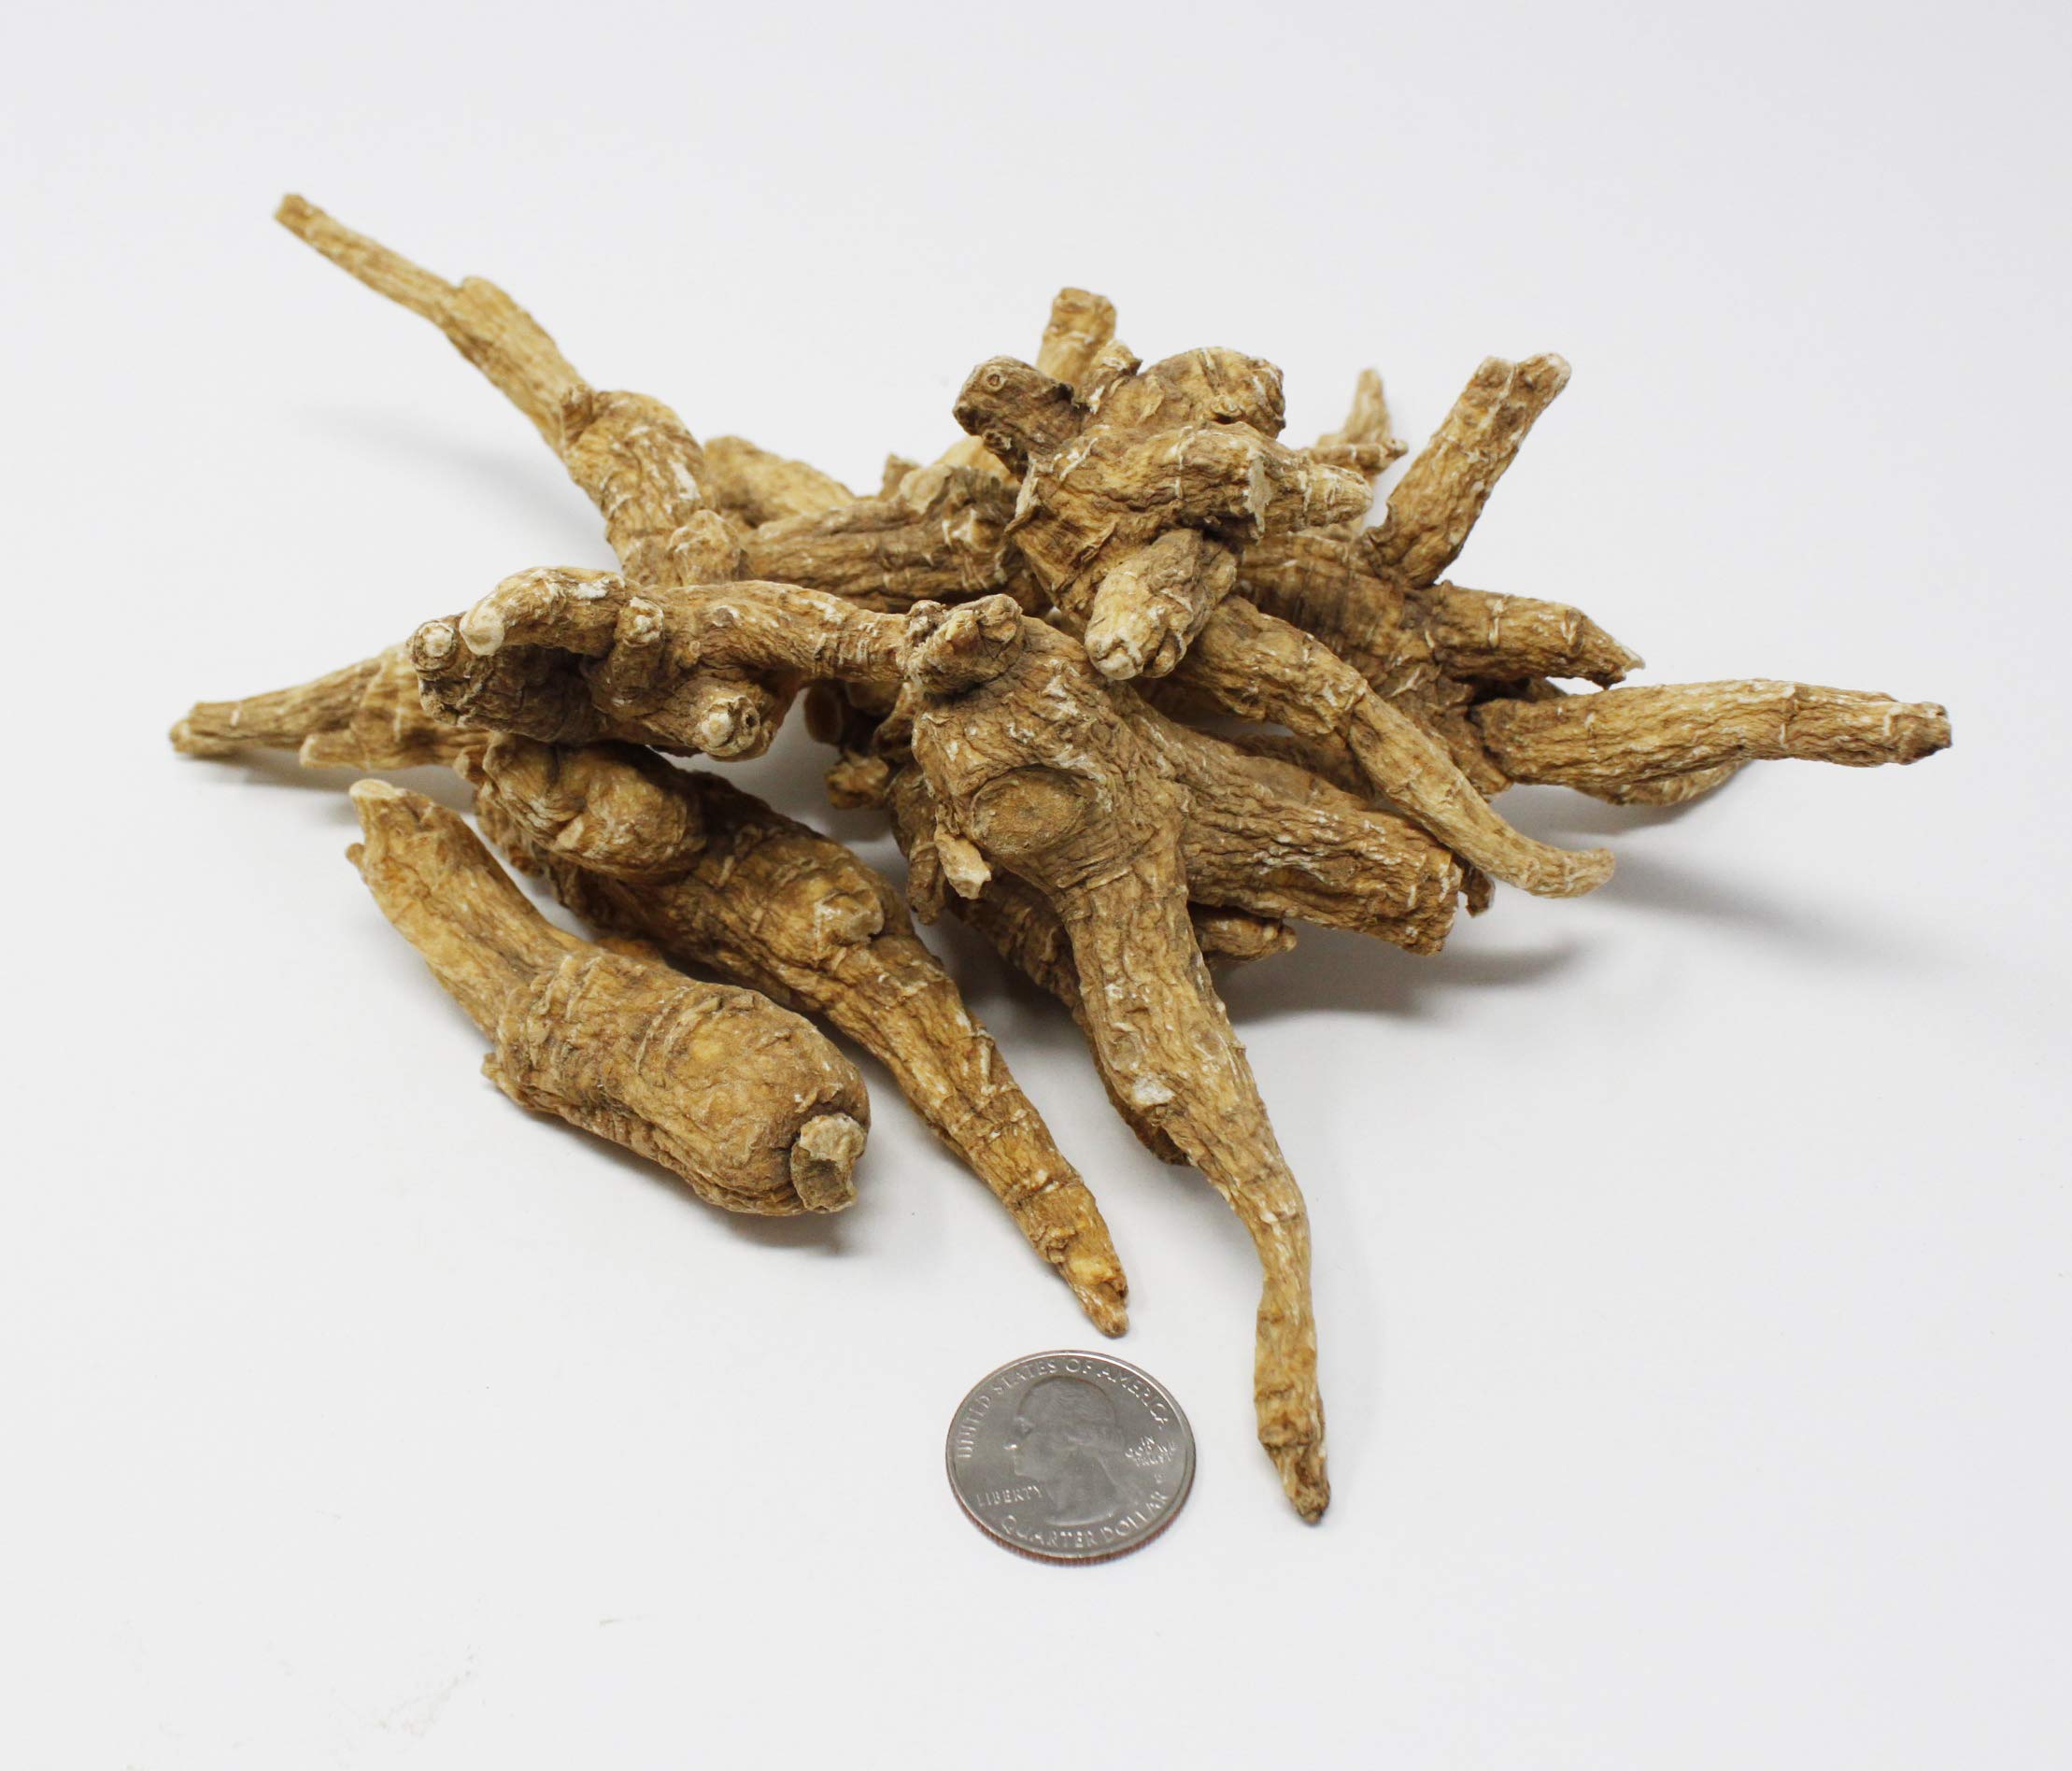 DABC OAK LAND 1LB=453gm/Box Hand-Selected American Wisconsin Farmed Ginseng Root | XX-Large 美国长枝西洋参 花旗参 礼盒装 |Cultivated American Wisconsin Ginseng W1 0150#XXL Box